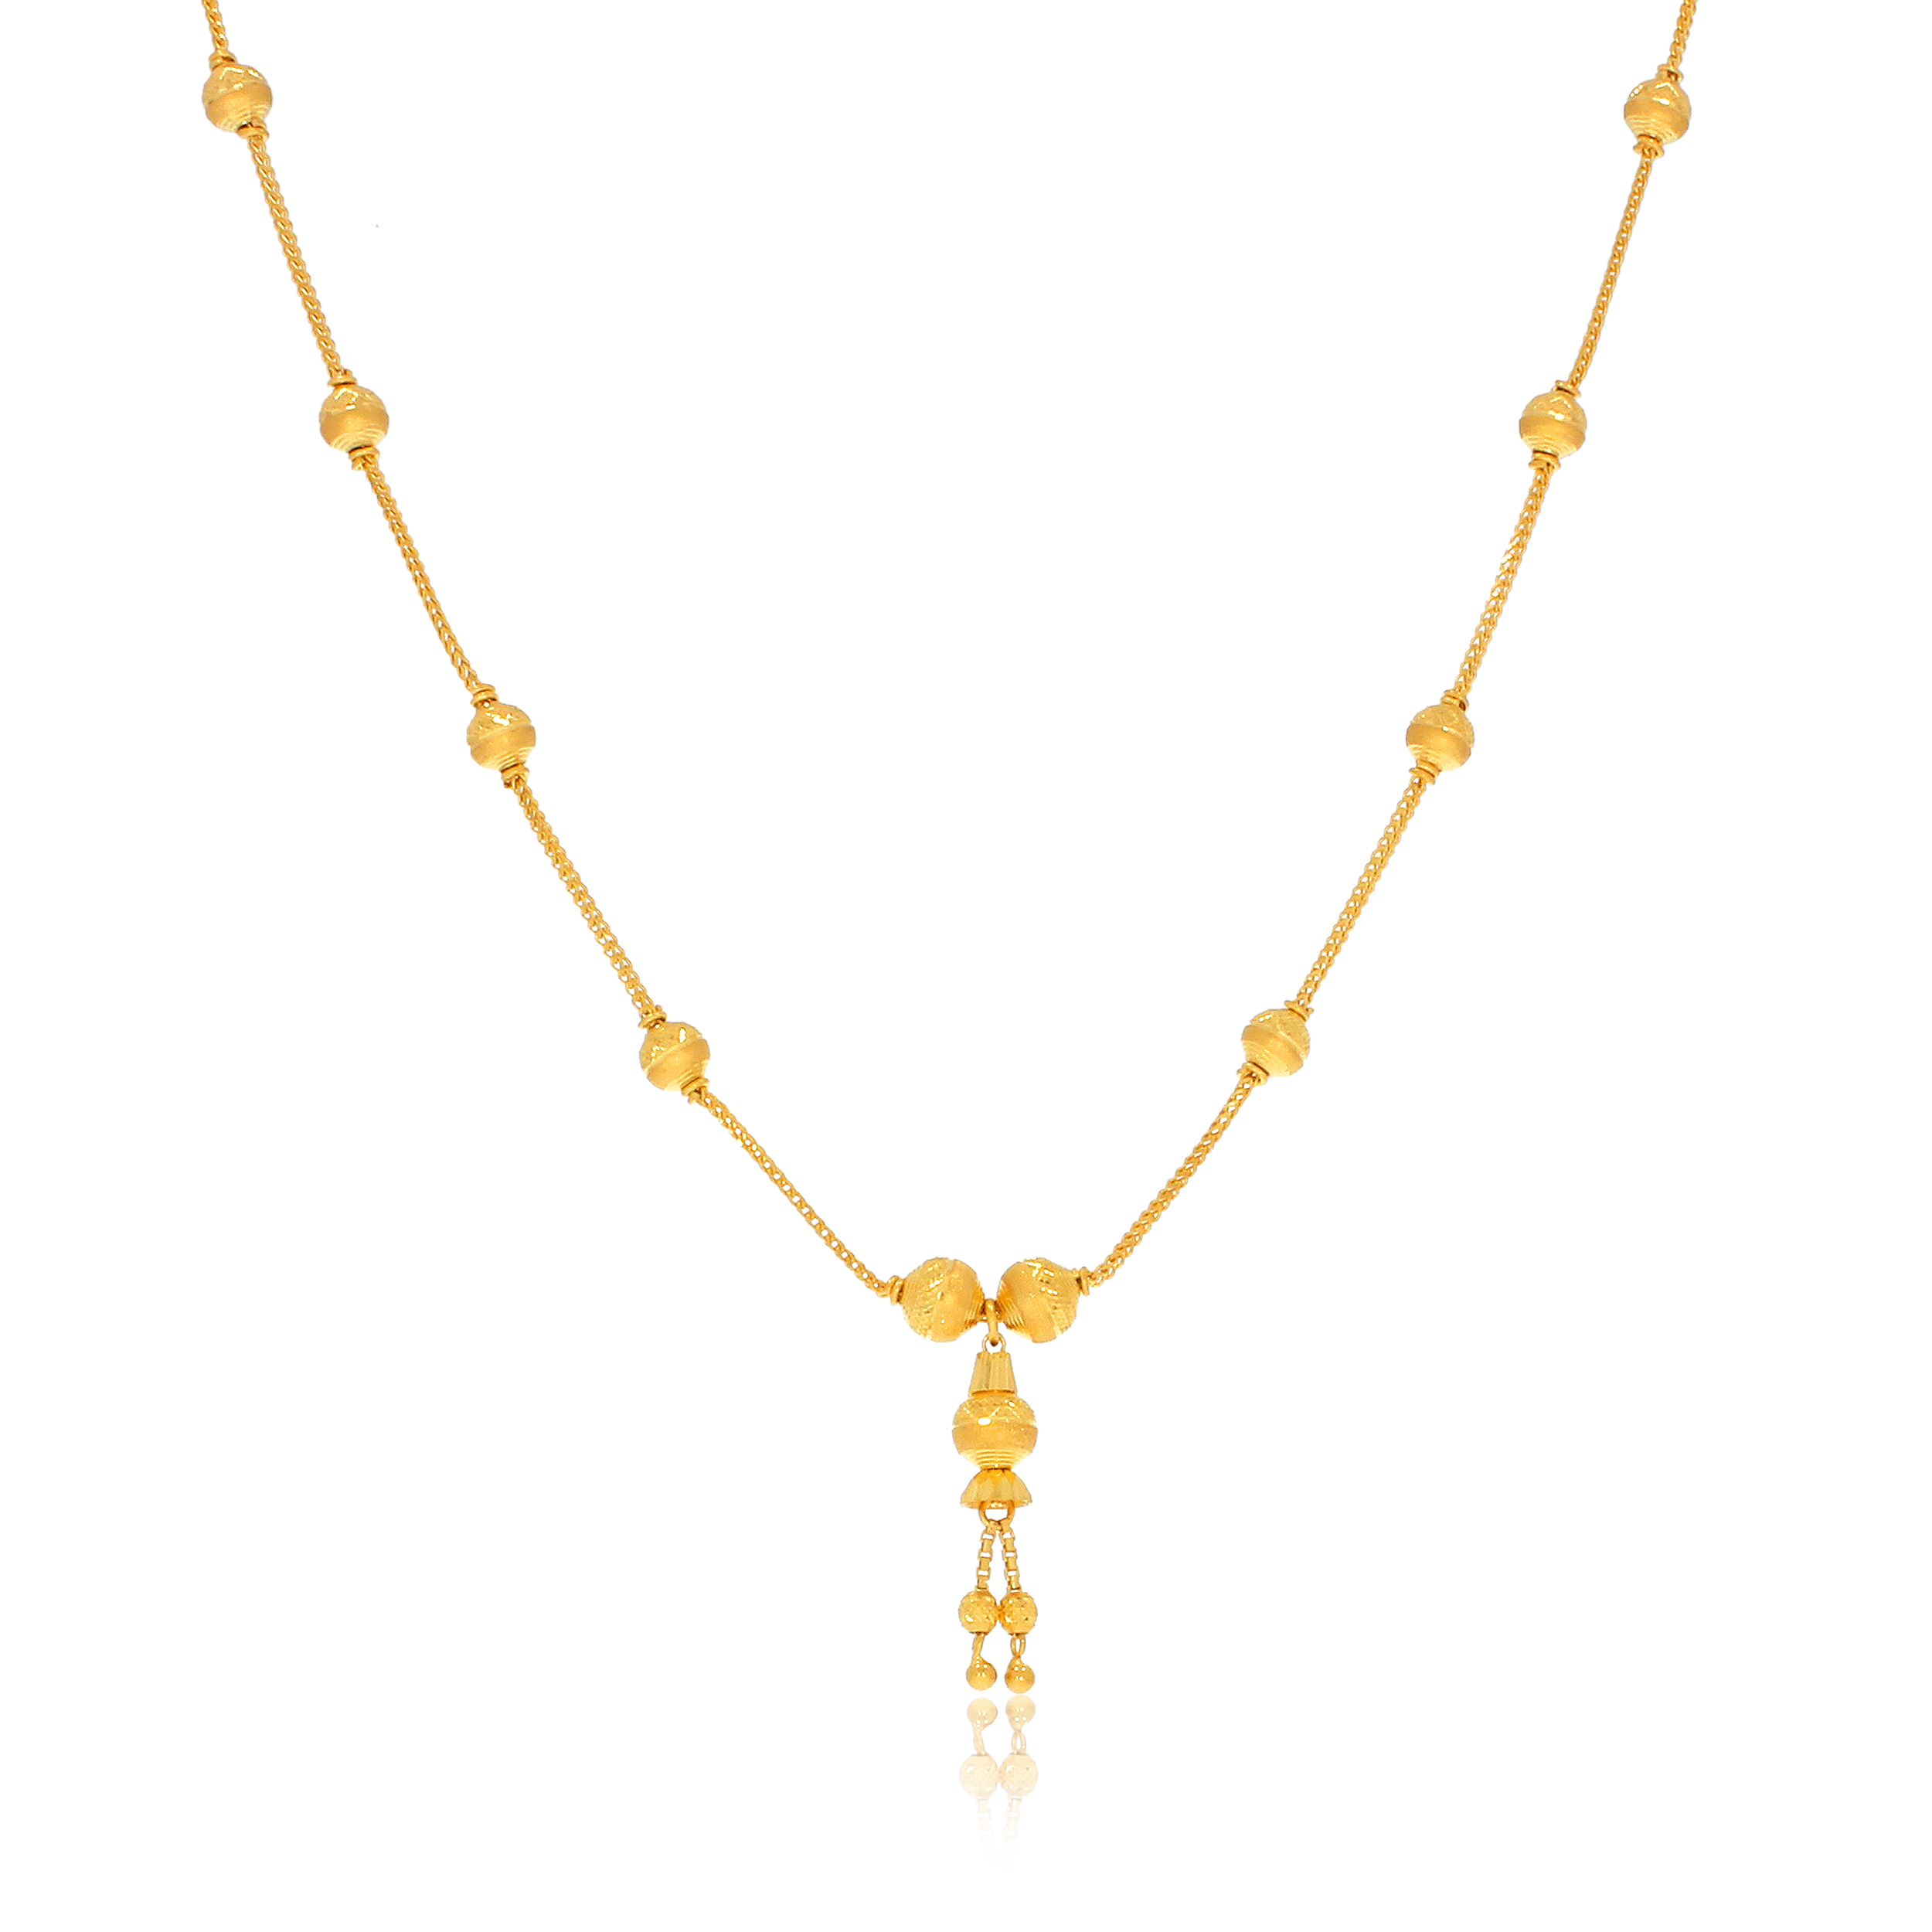 JEET  AABI JEWELS 22CT  BIS HALLMARK  GOLD  NECKLACE FOR  WOMEN